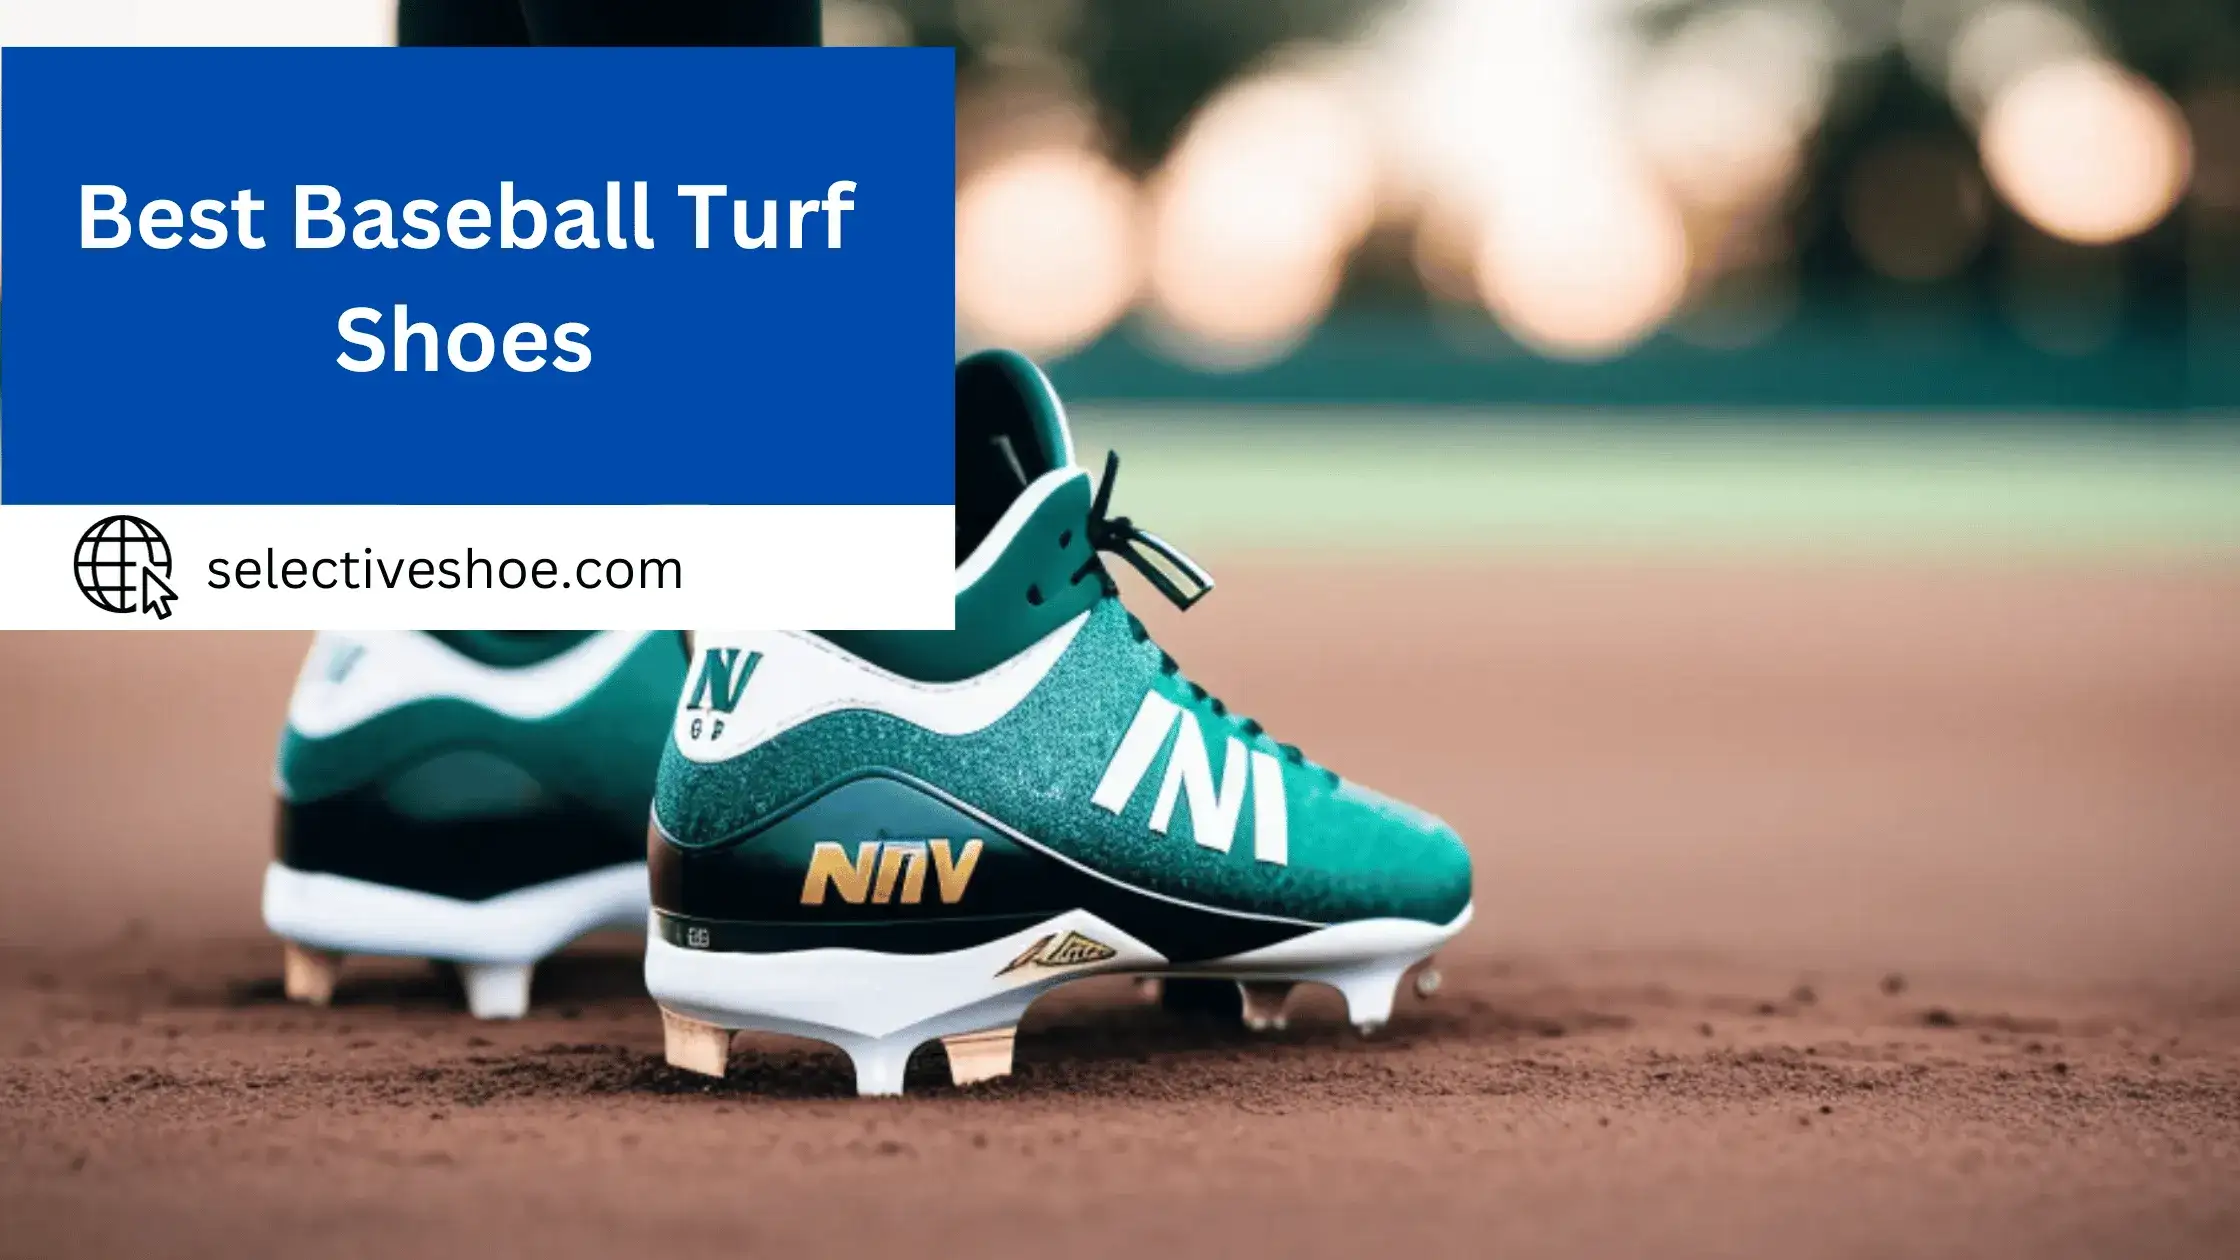 Revealing Top 10 Best Baseball Turf Shoes - Perfect Options